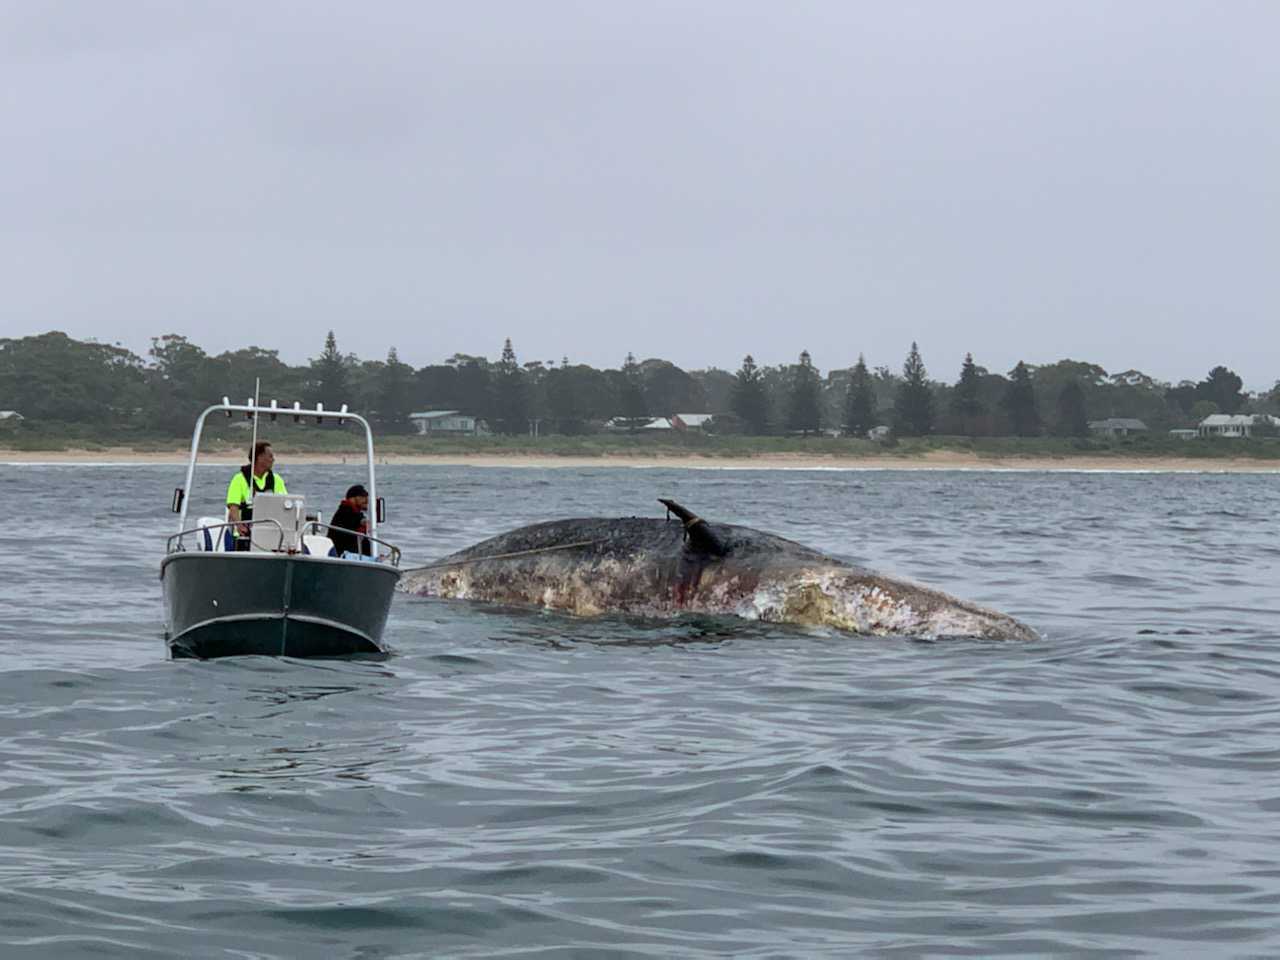 Sharks sighted feeding off whale carcass near Broulee